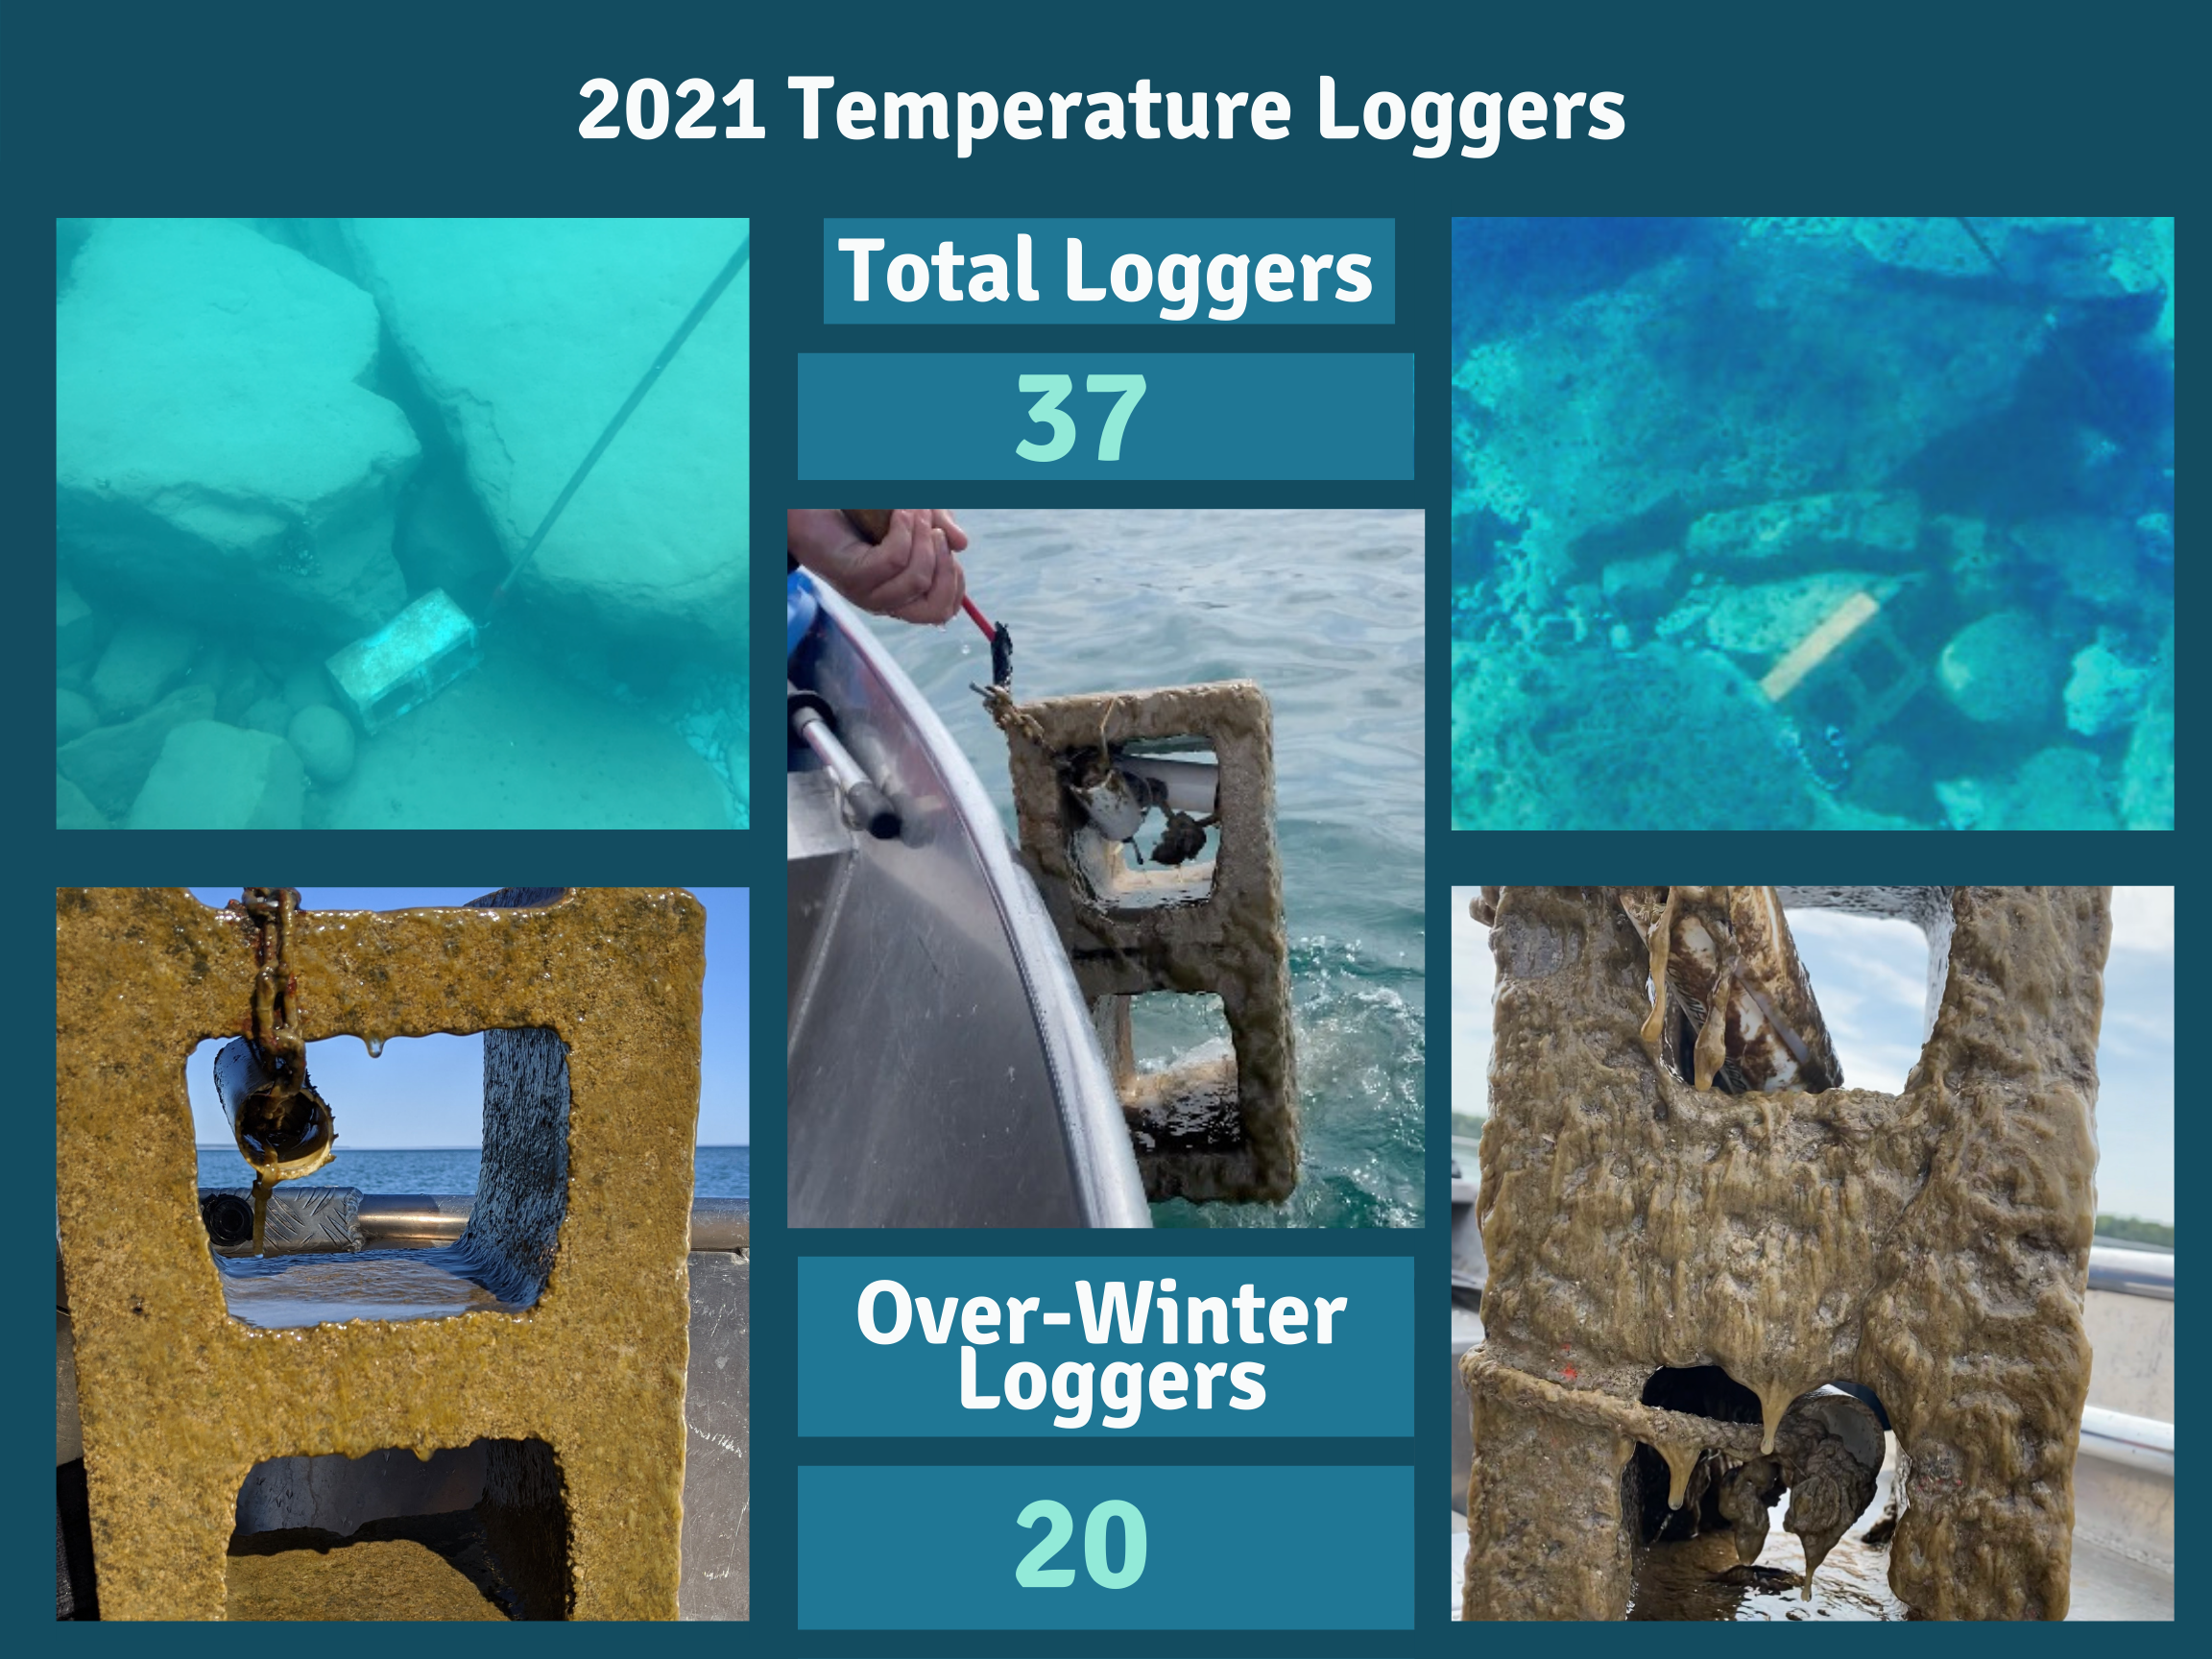 Collage showing temp loggers both in water and out. Title: 2021 Temperature Loggers. Total loggers: 37. Over-Winter Loggers 20.